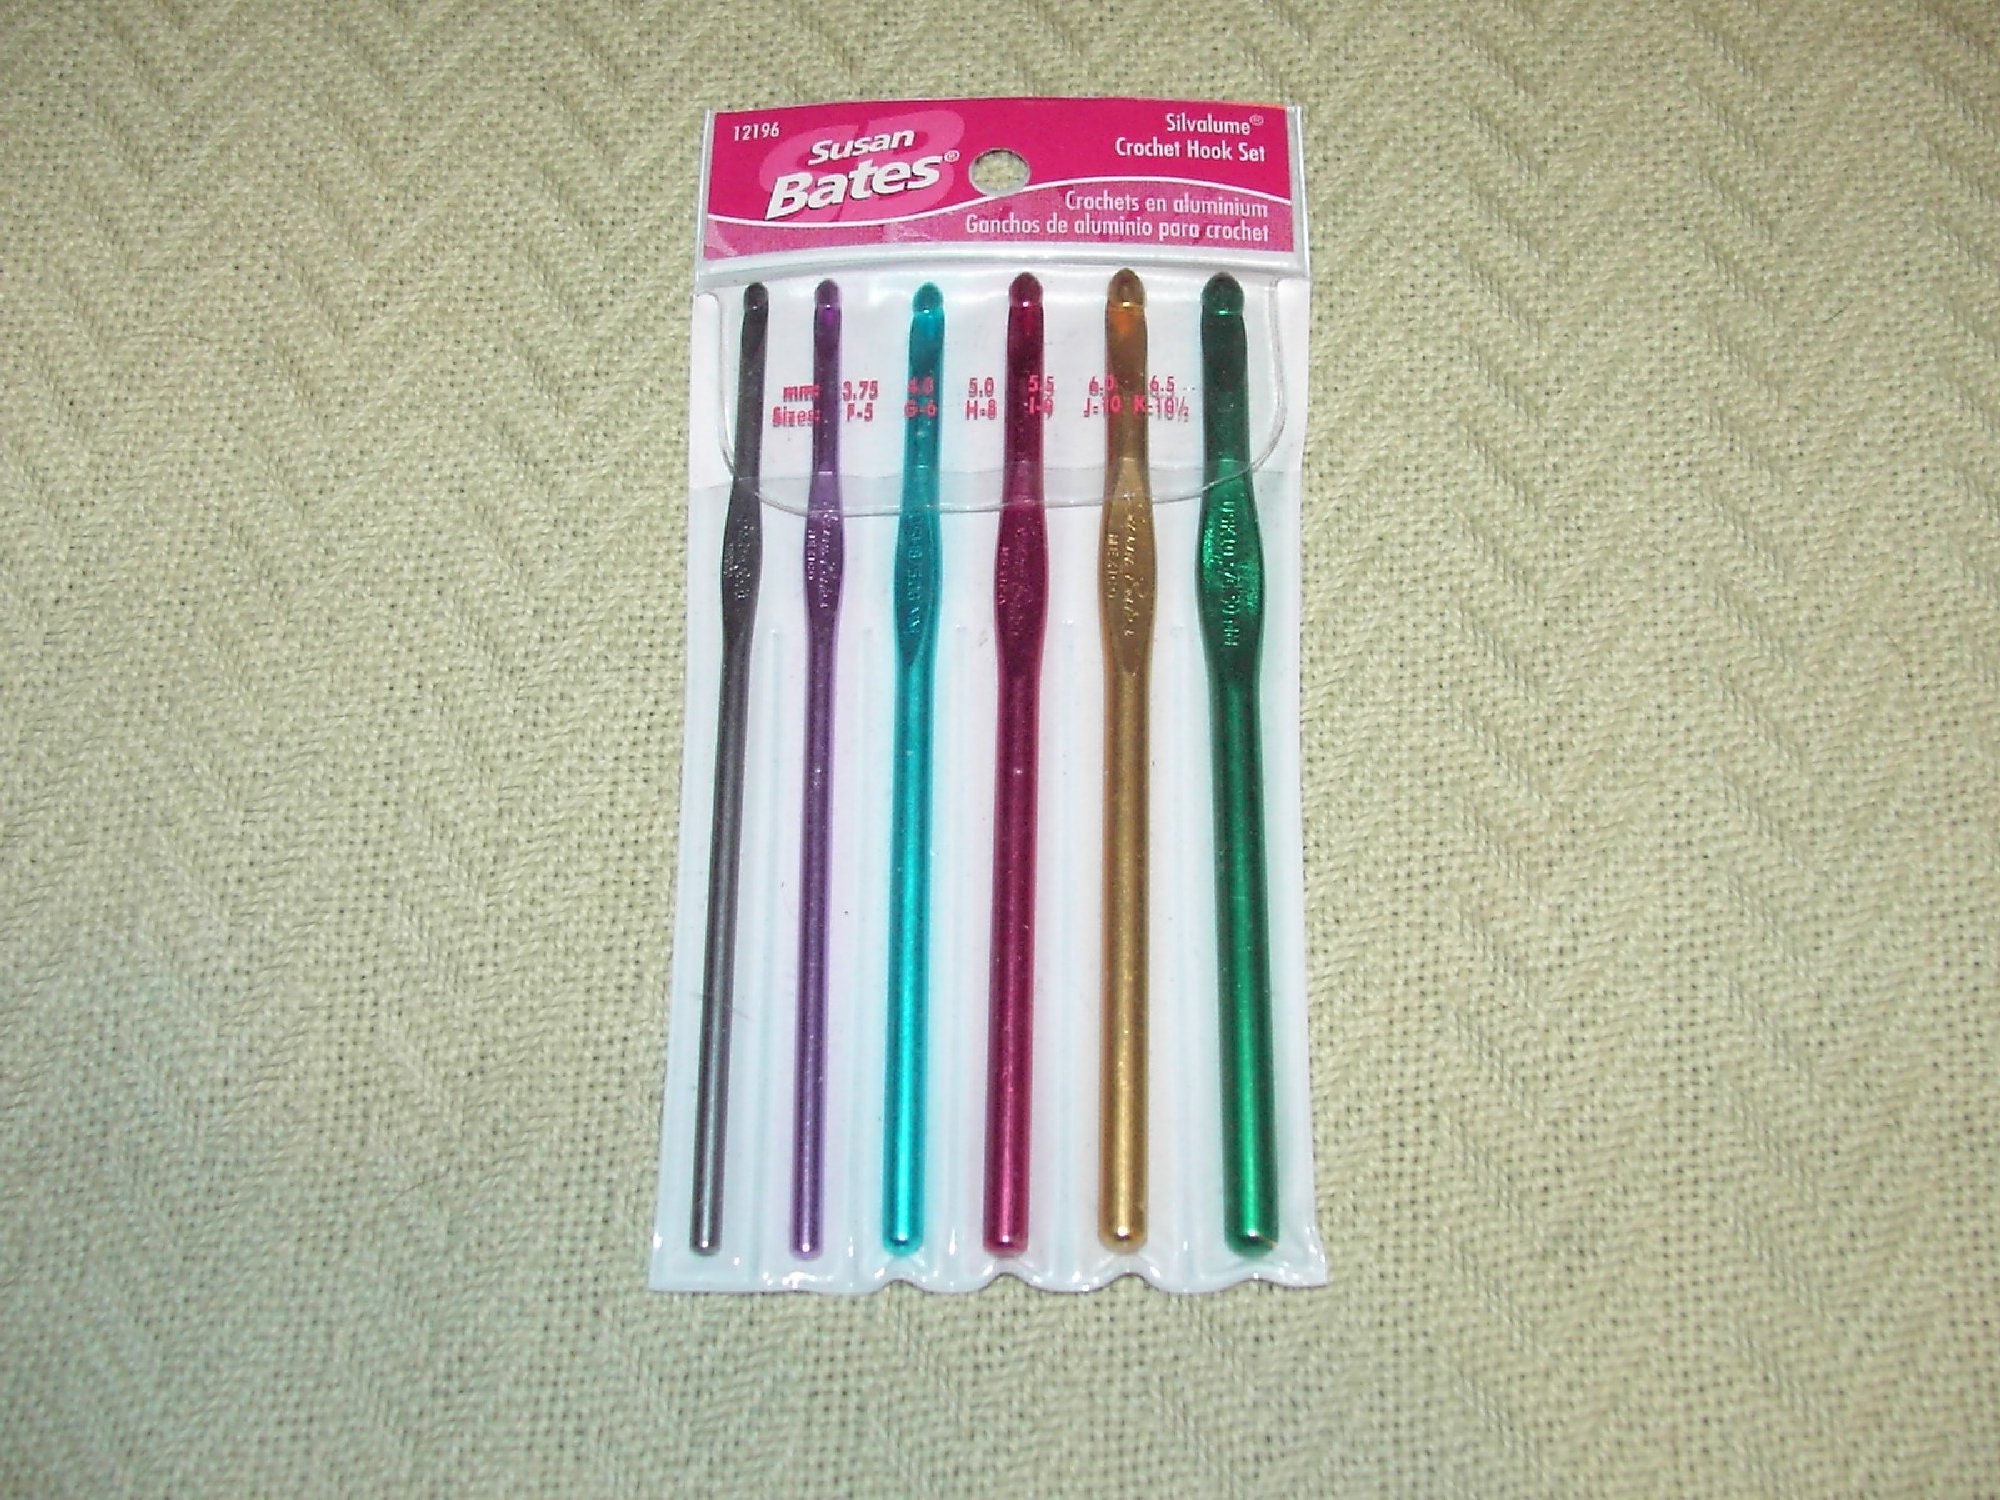 Crochet with Ease with Susan Bates Silvalume Aluminum Crochet Hooks